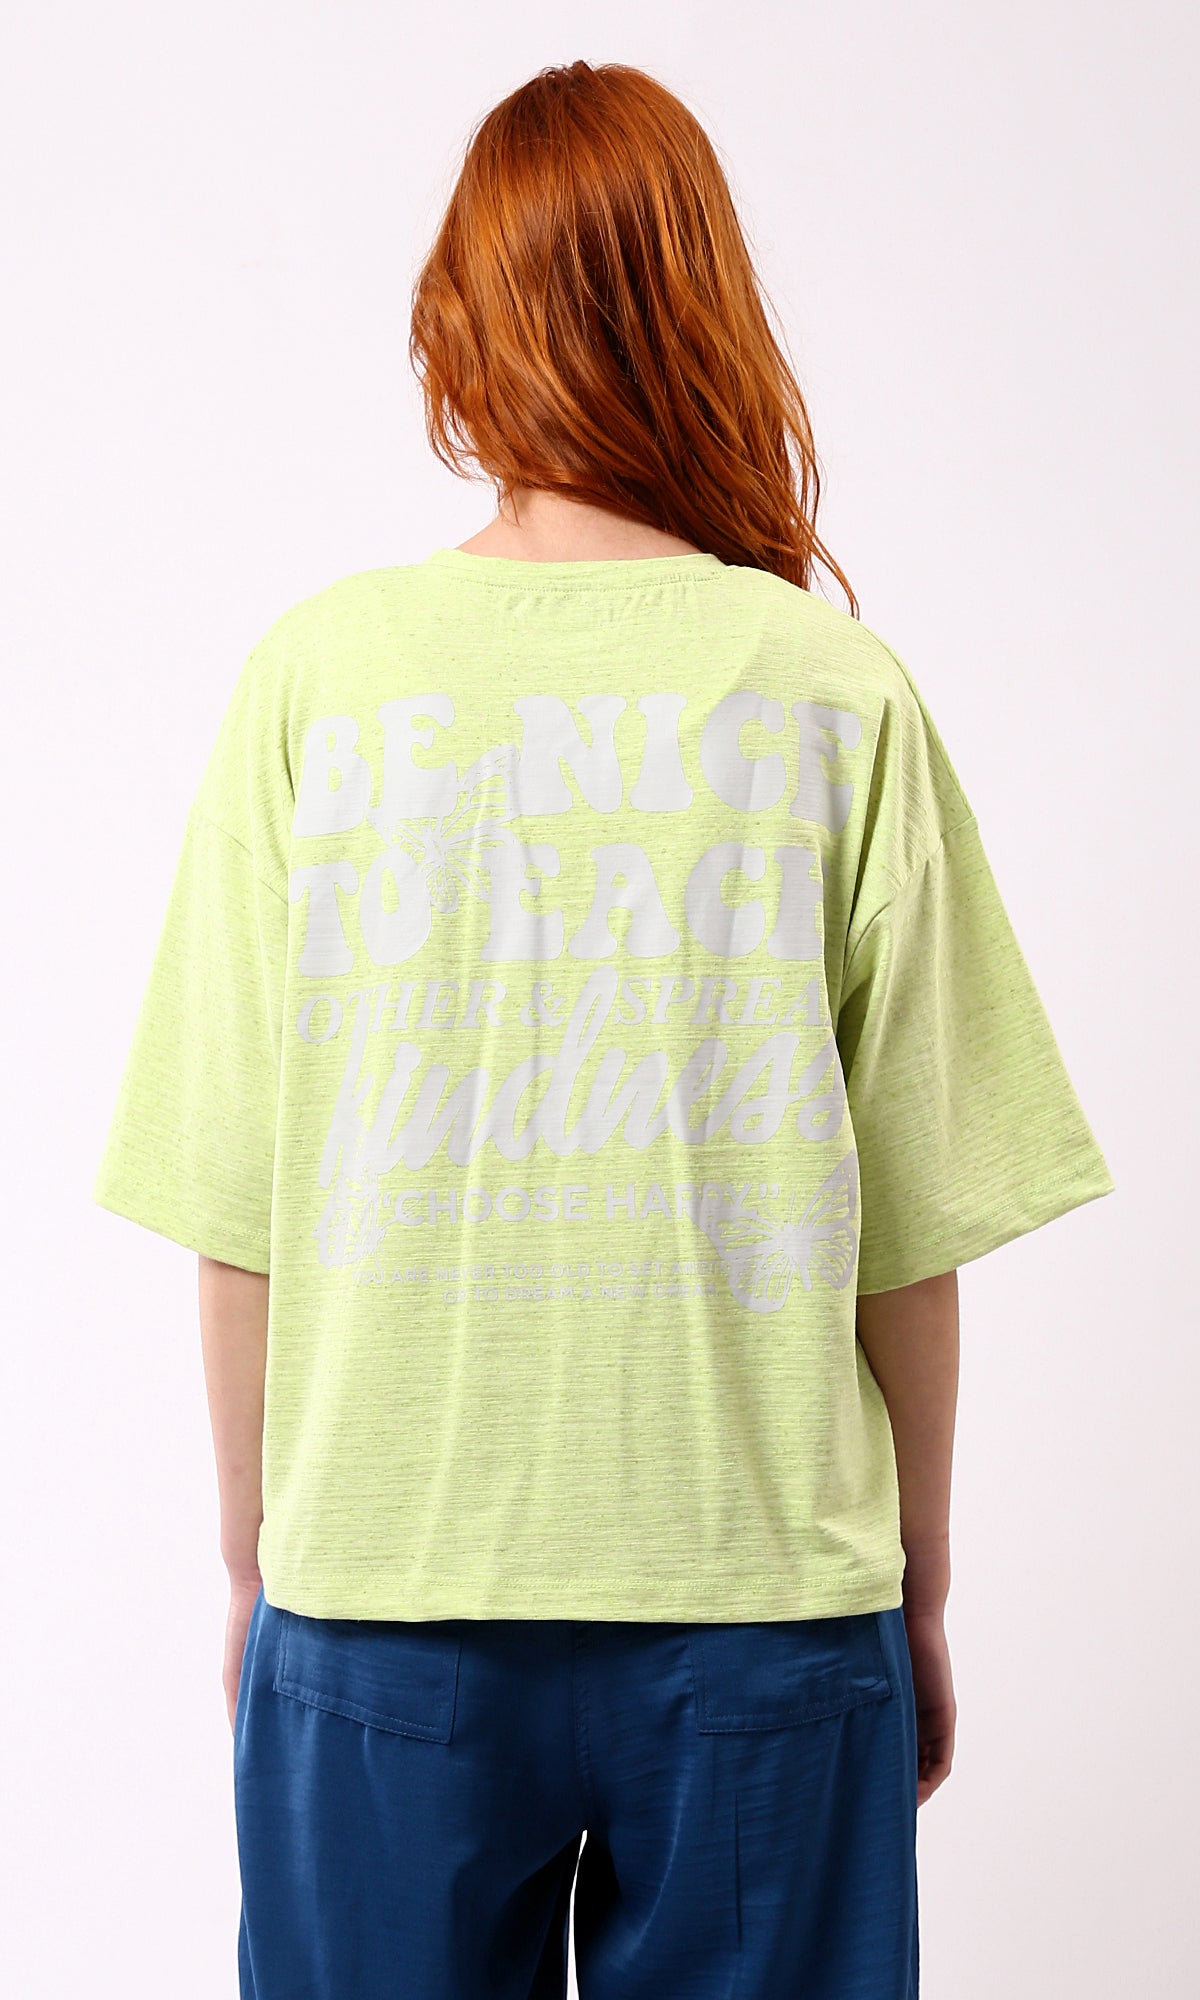 O181665 "Choose Happy" Printed Loose Fit Cotton Tee - Neon Green